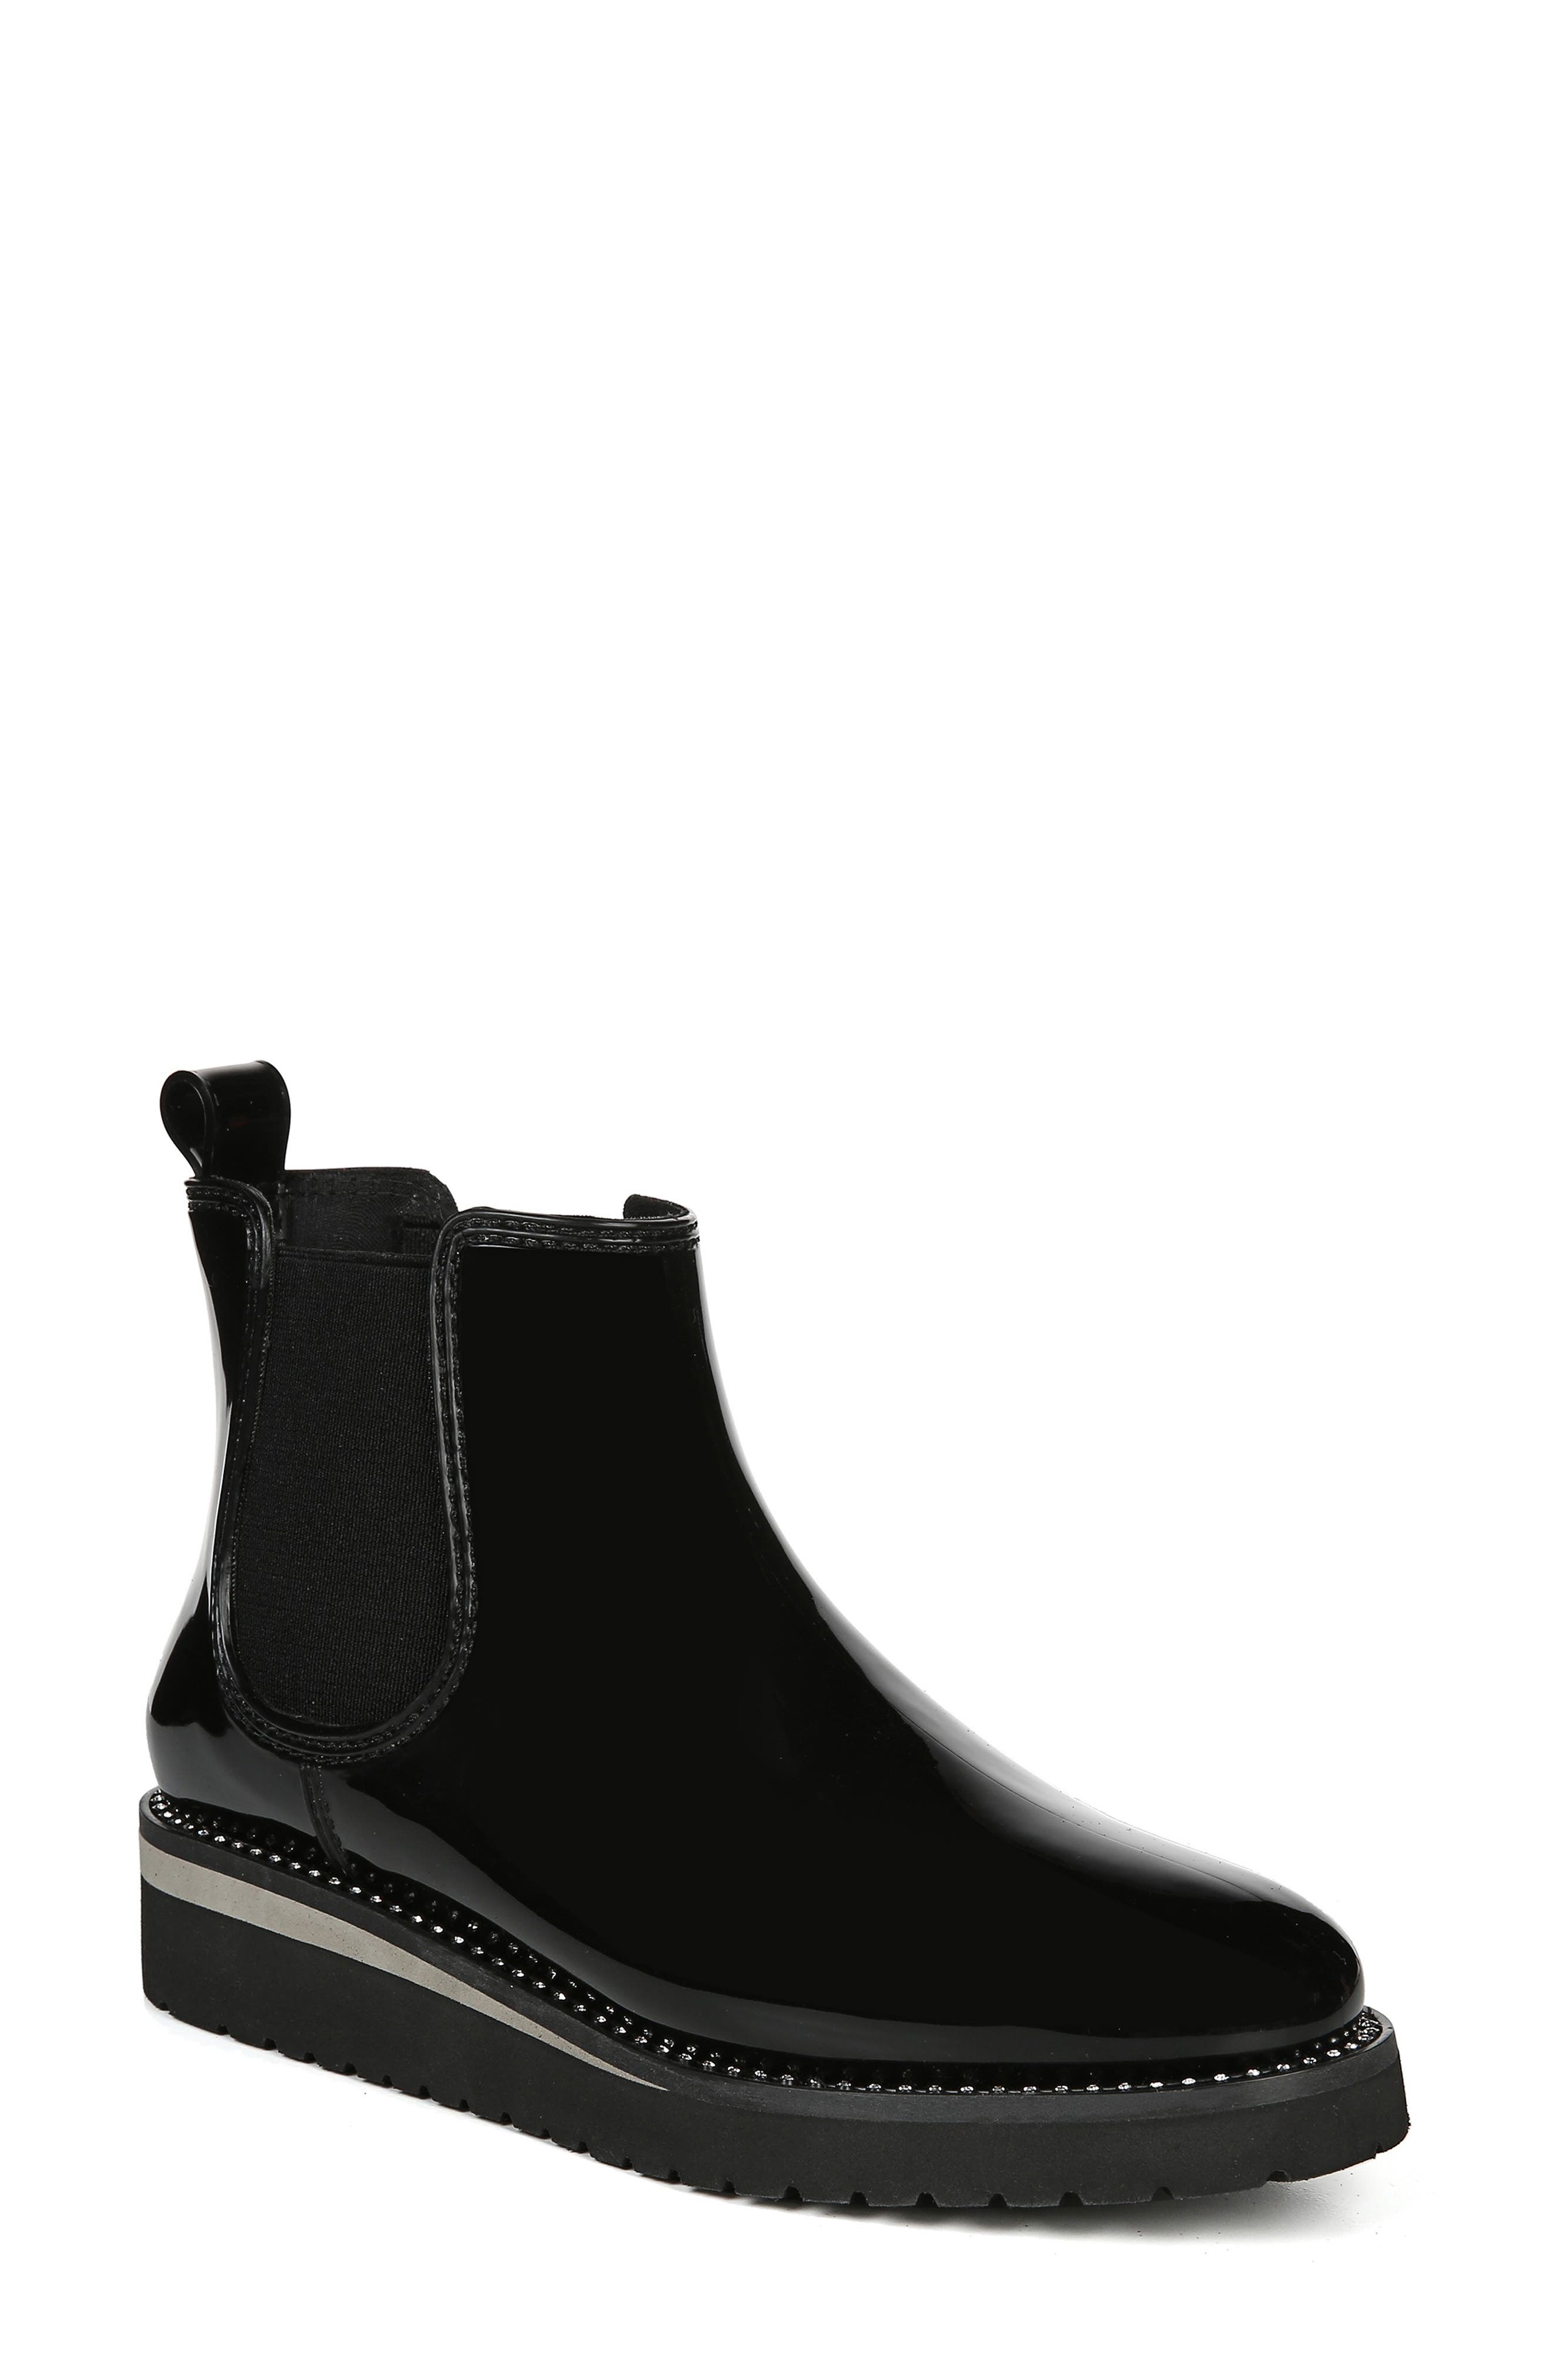 naturalizer chelsea boots